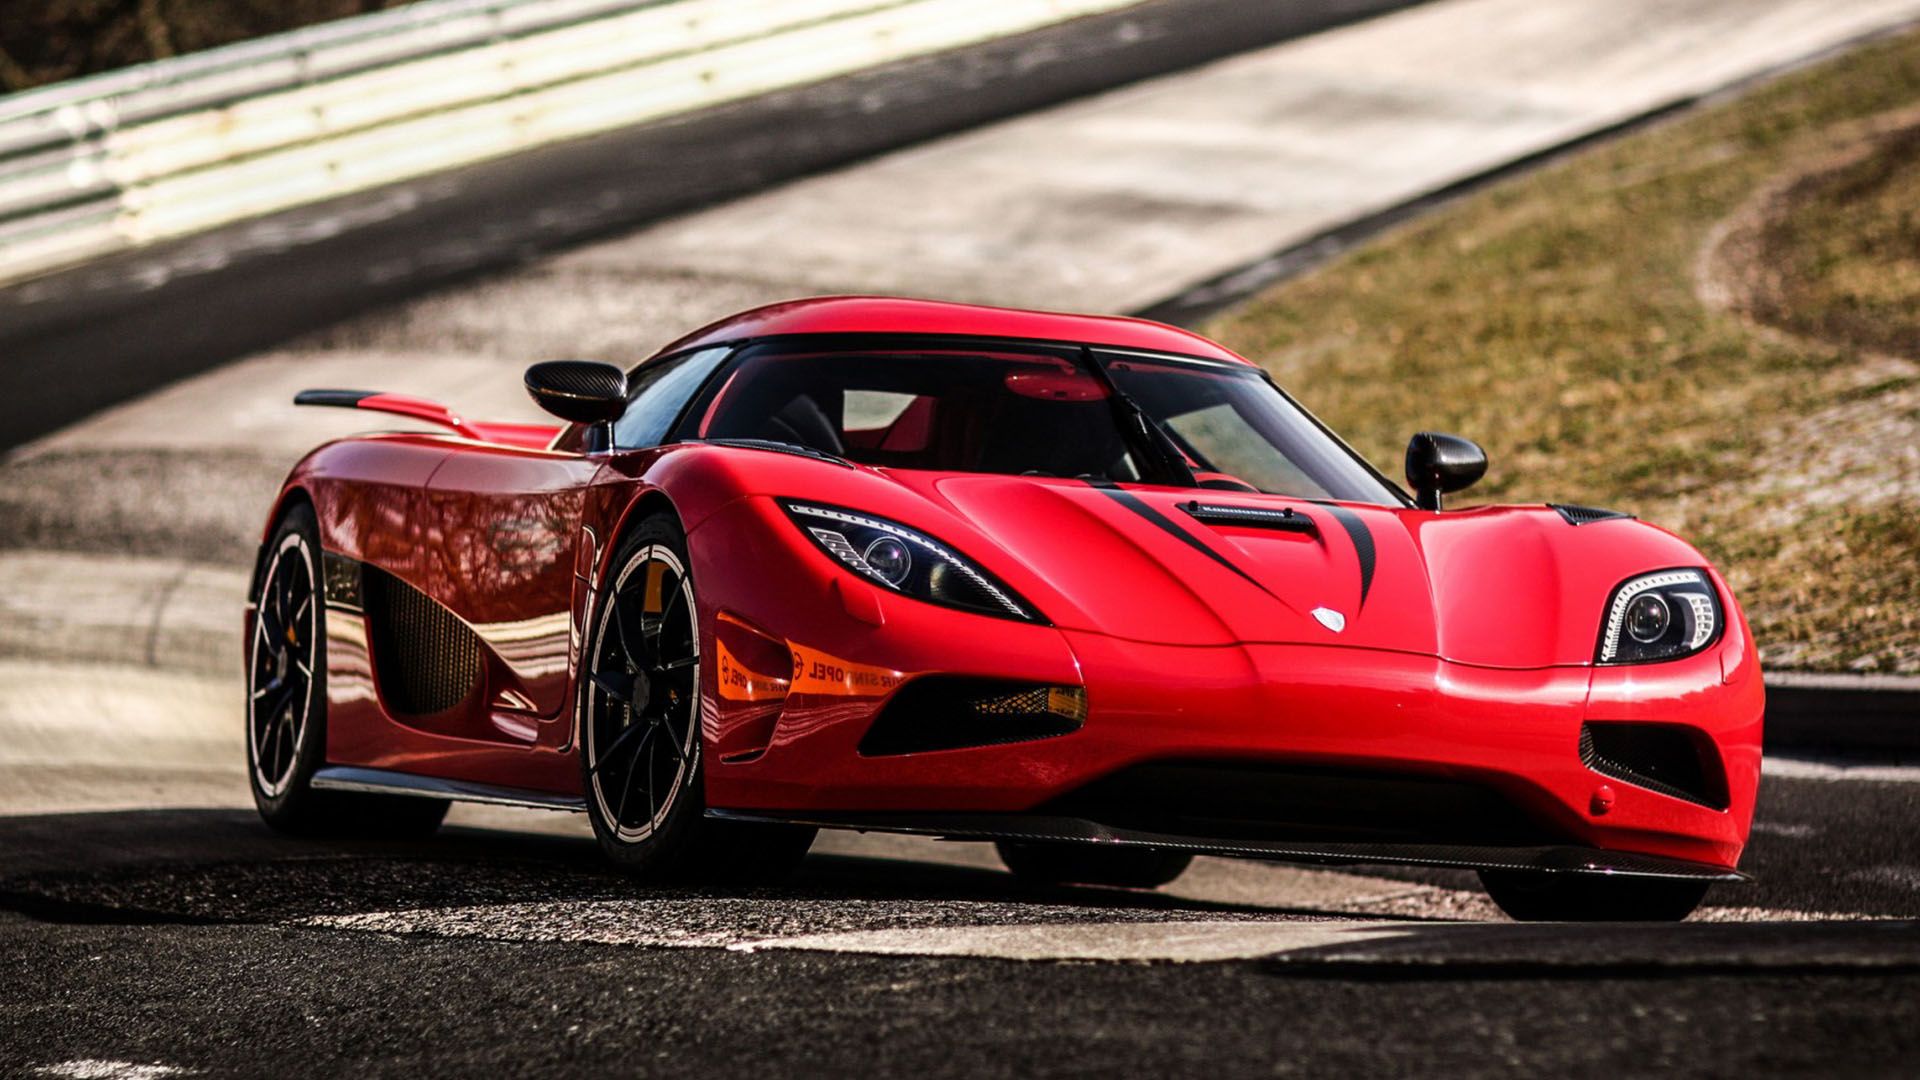 http://static0.therichestimages.com/cdn/1000/562/90/cw/wp-content/uploads/2015/04/Koenigsegg-Agera-R.jpg